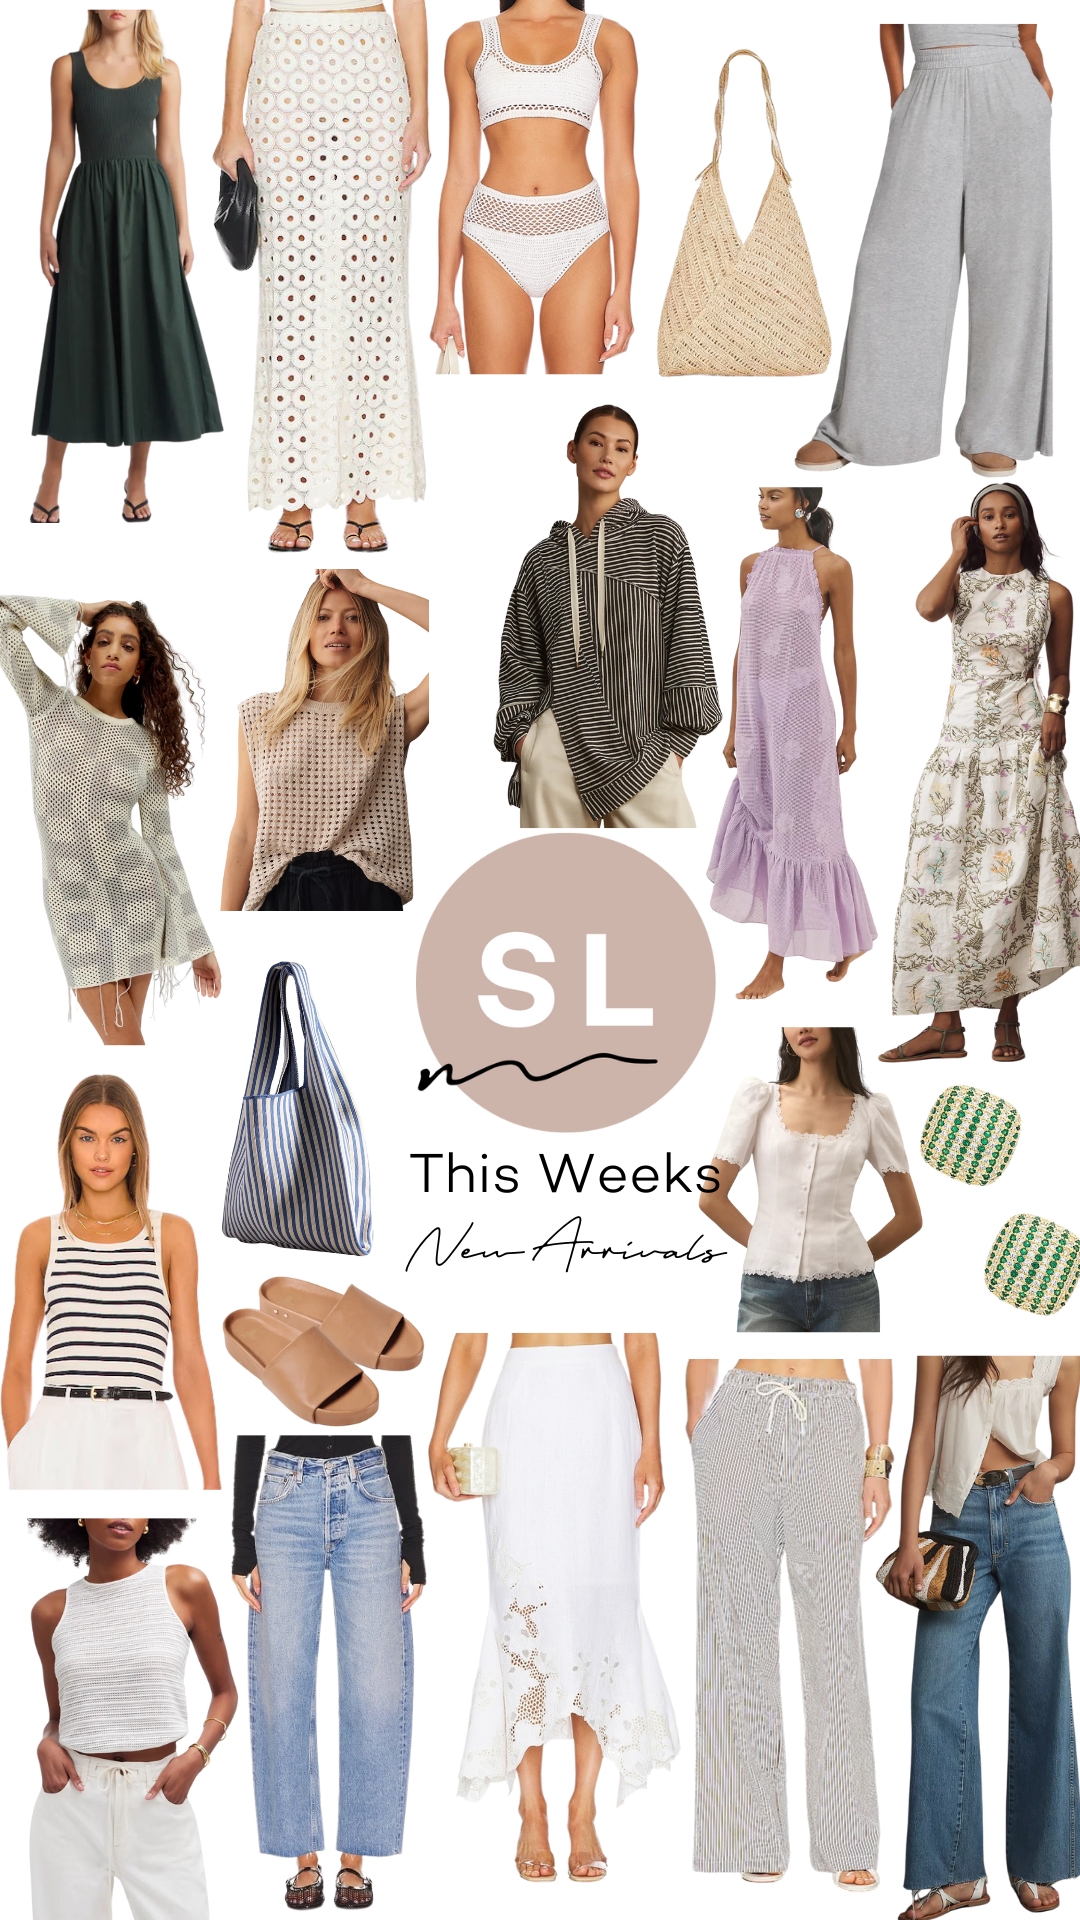 This Week's New Arrivals by Salty Lashes Blogger Lisa Allen